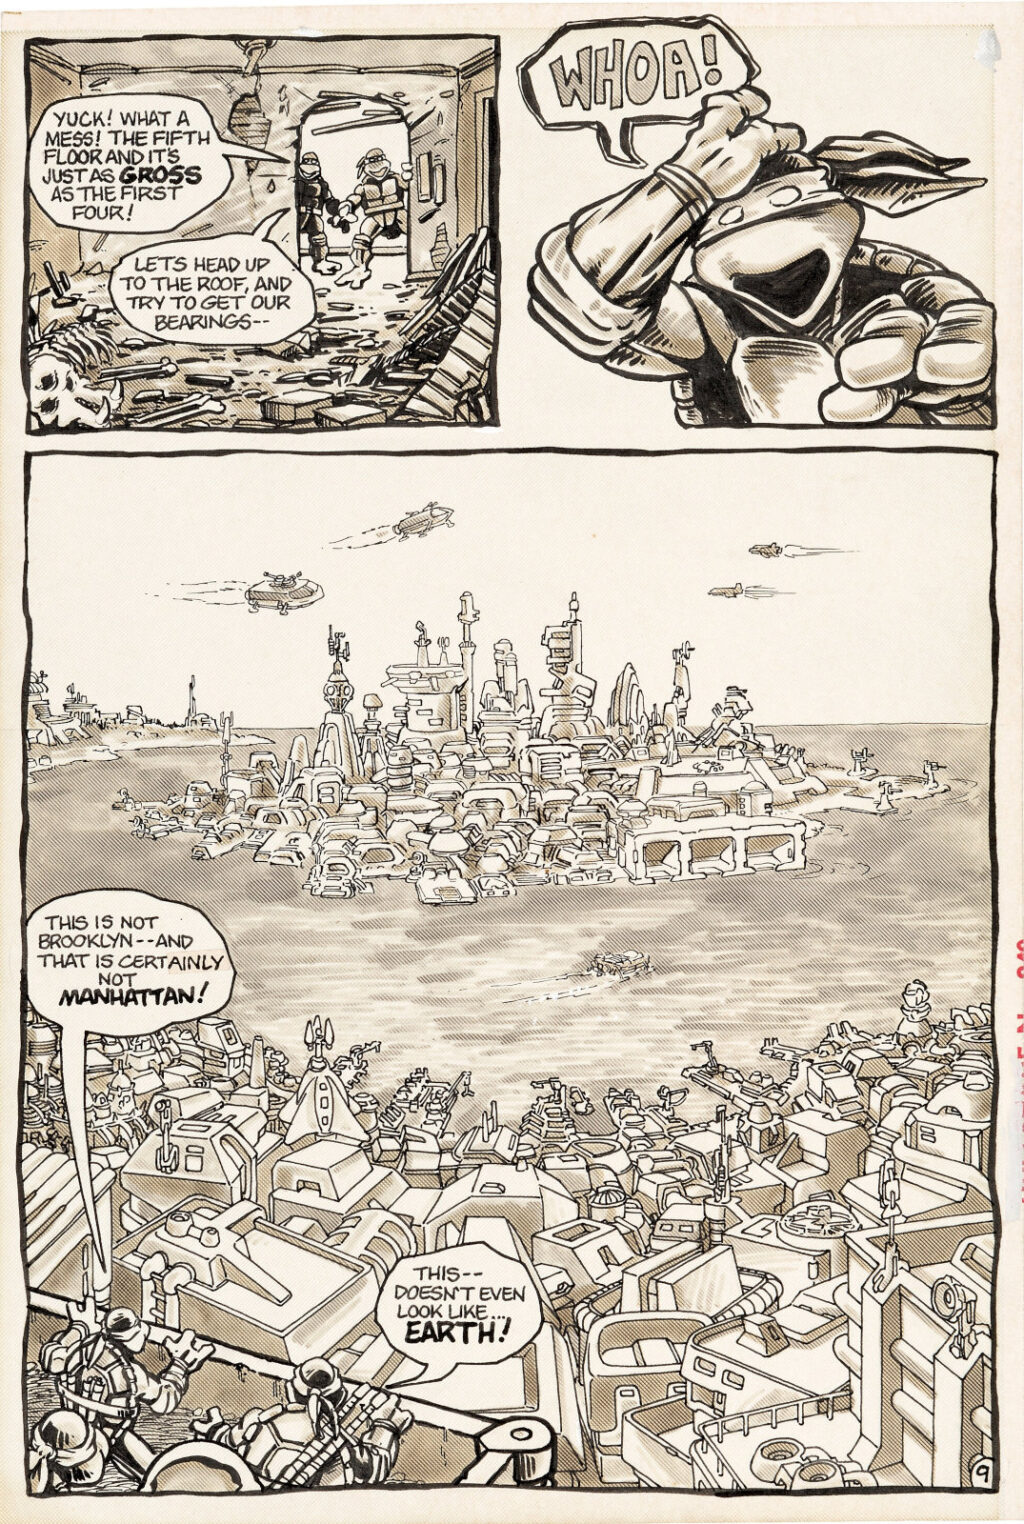 Teenage Mutant Ninja Turtles issue 5 page 9 by Kevin Eastman and Peter Laird